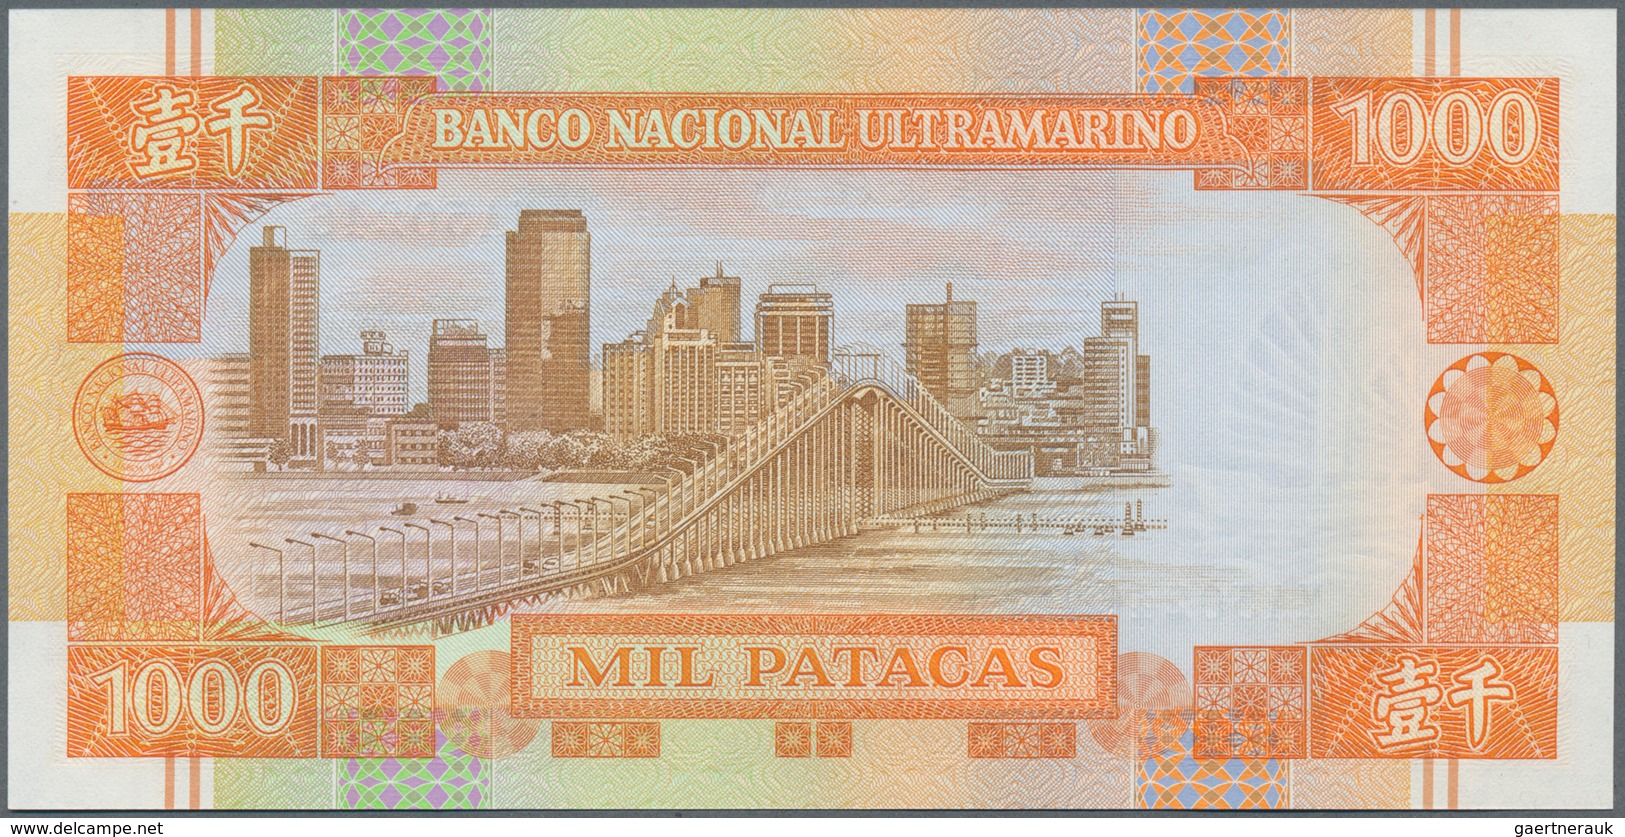 Macau / Macao: Original folder by the Banco Nacional Ultramarino for the issue of the new banknote s